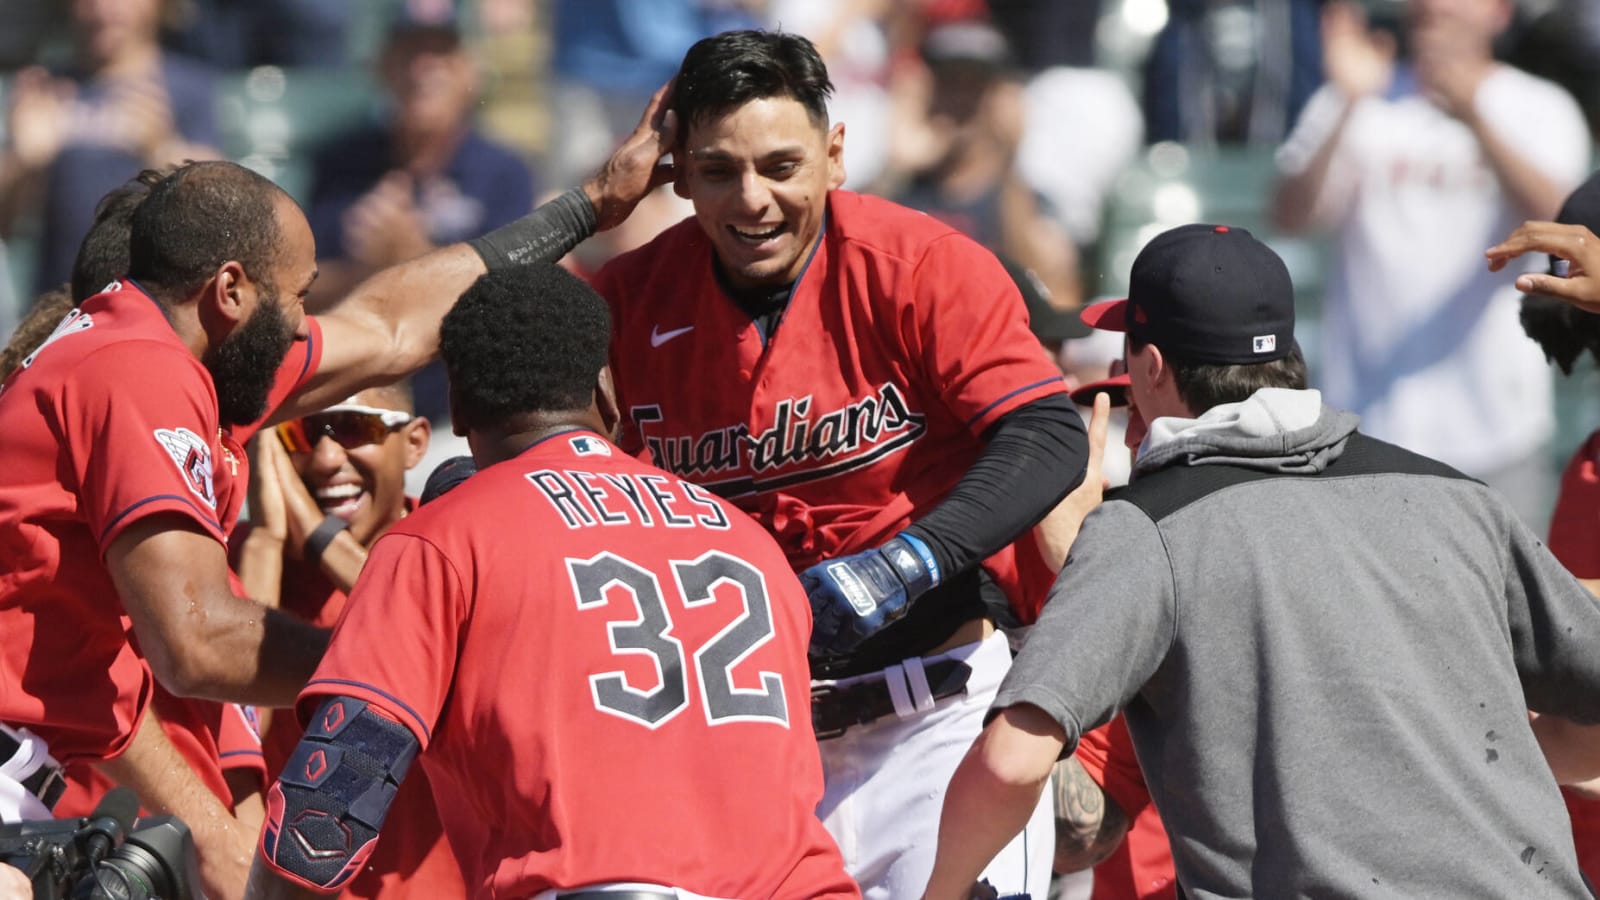 Andres Gimenez had funny gesture after walk-off HR